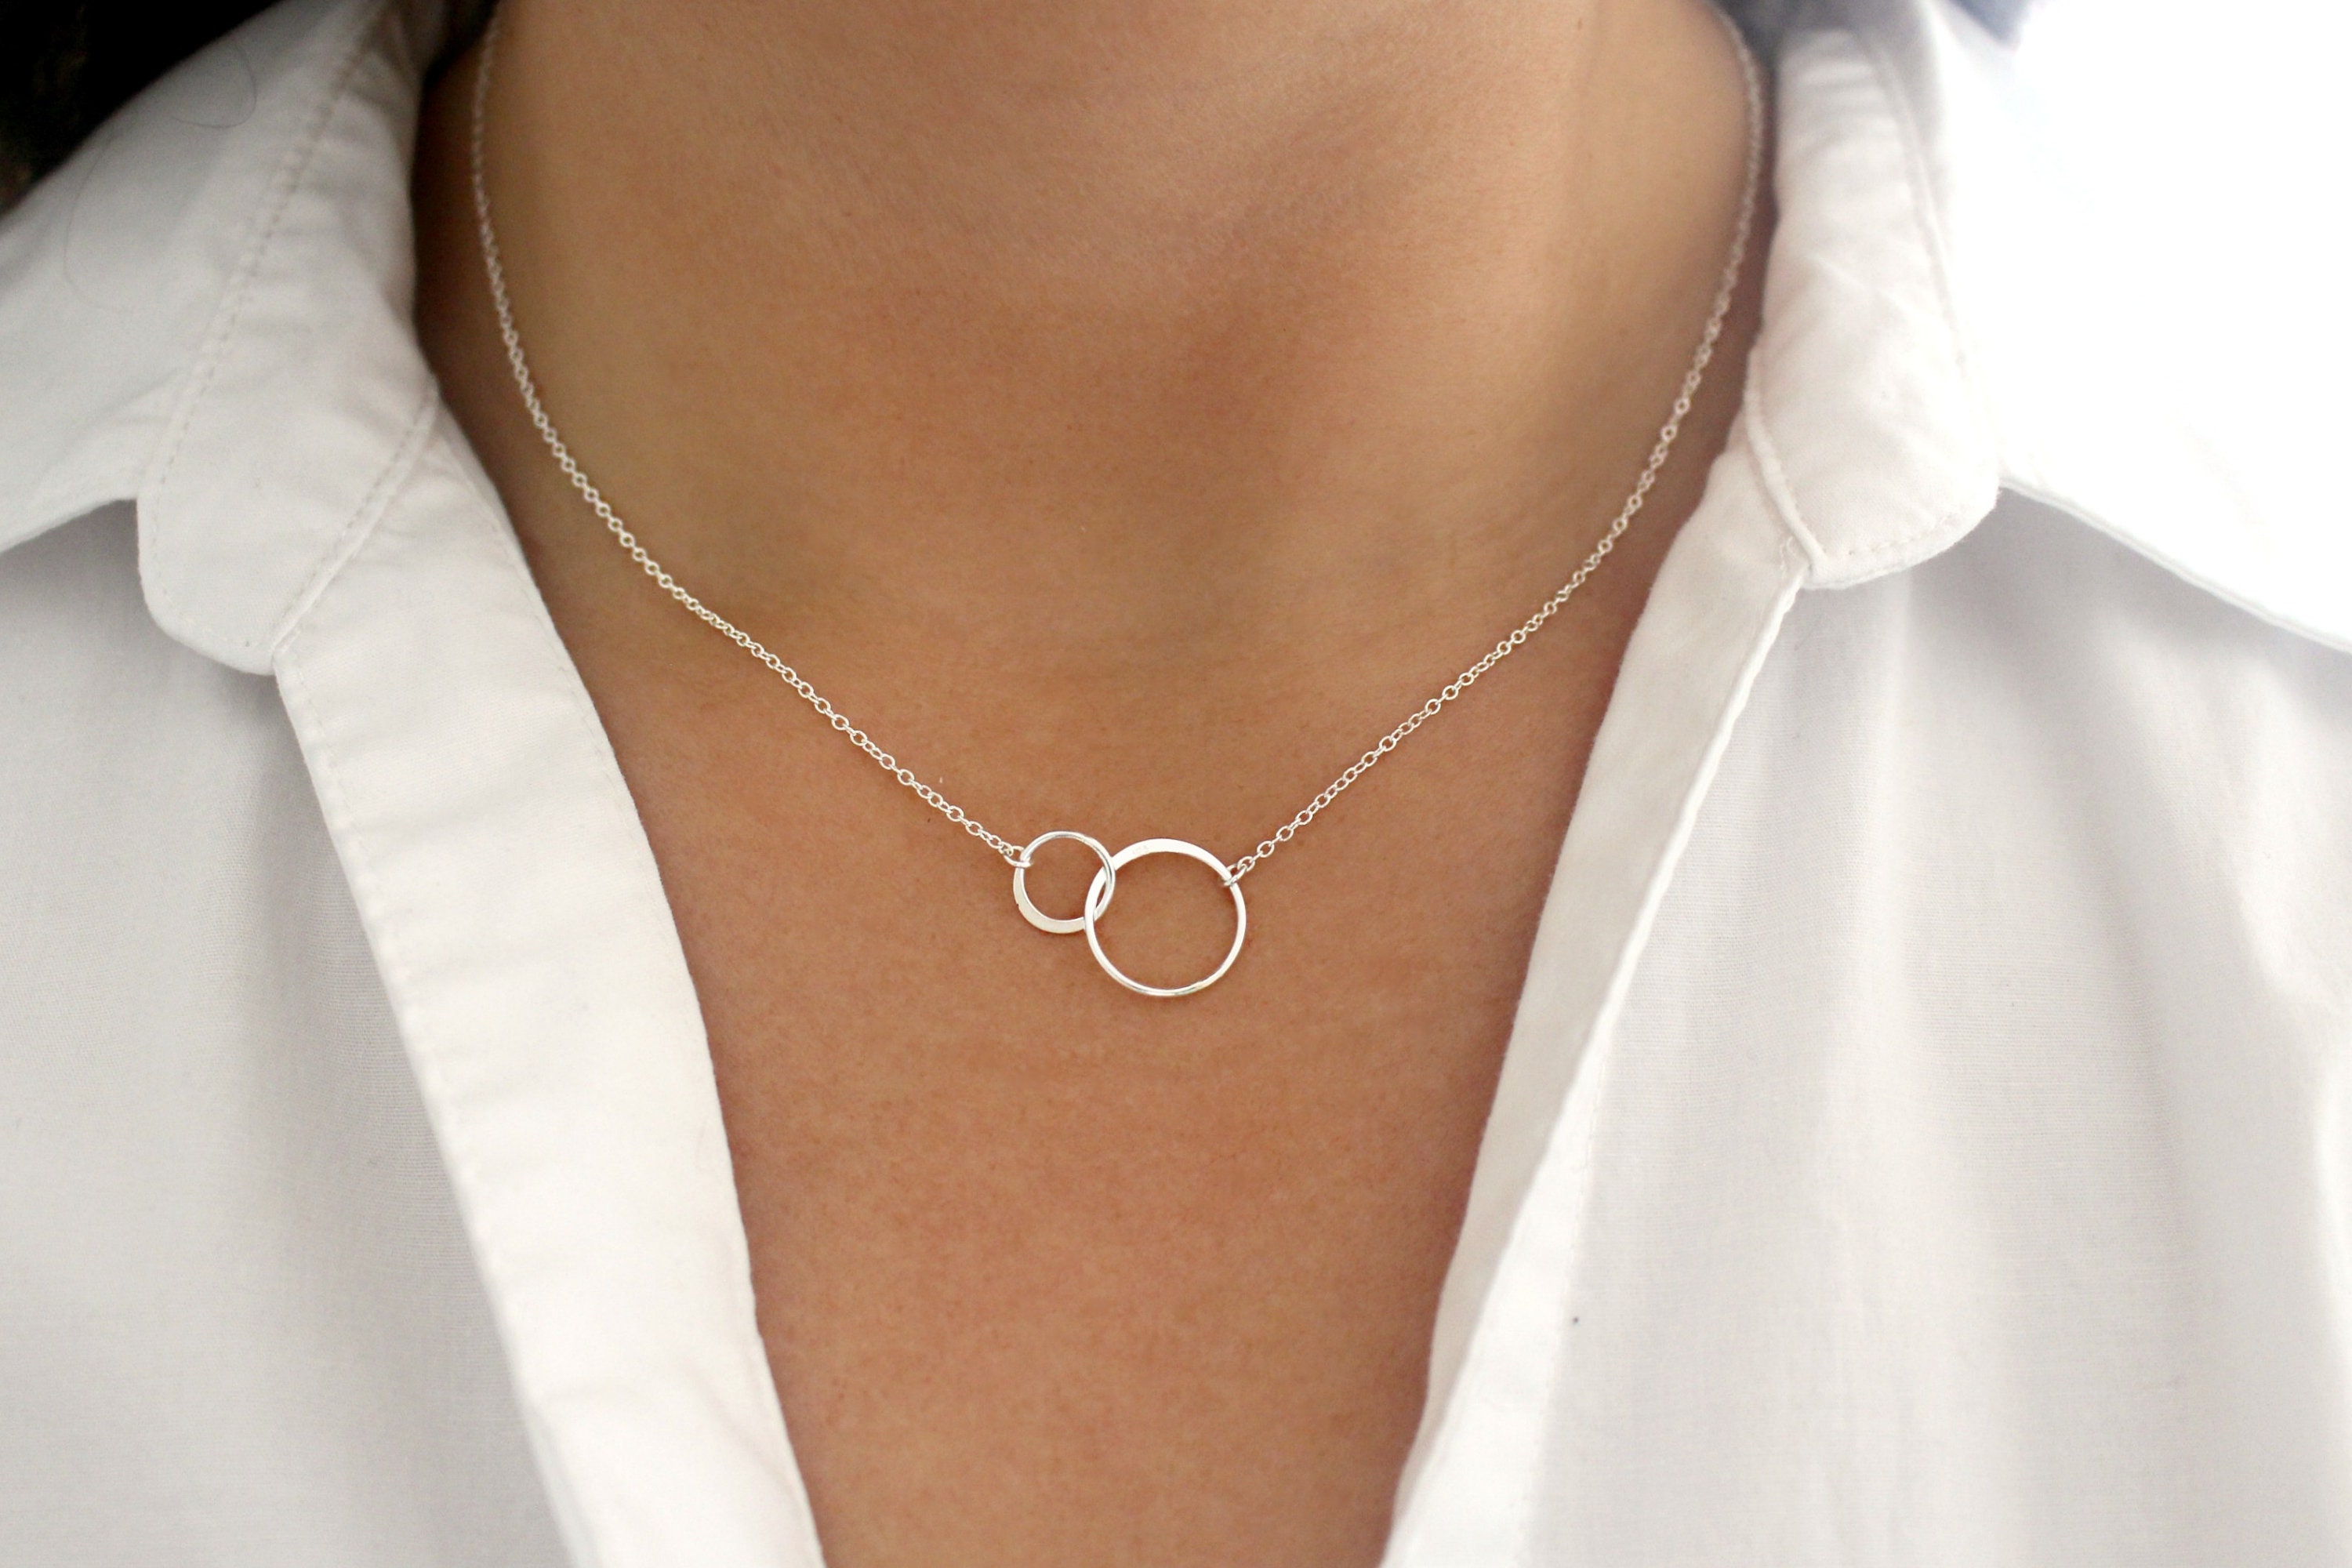 Entwined Circles Necklace | Diamonfire